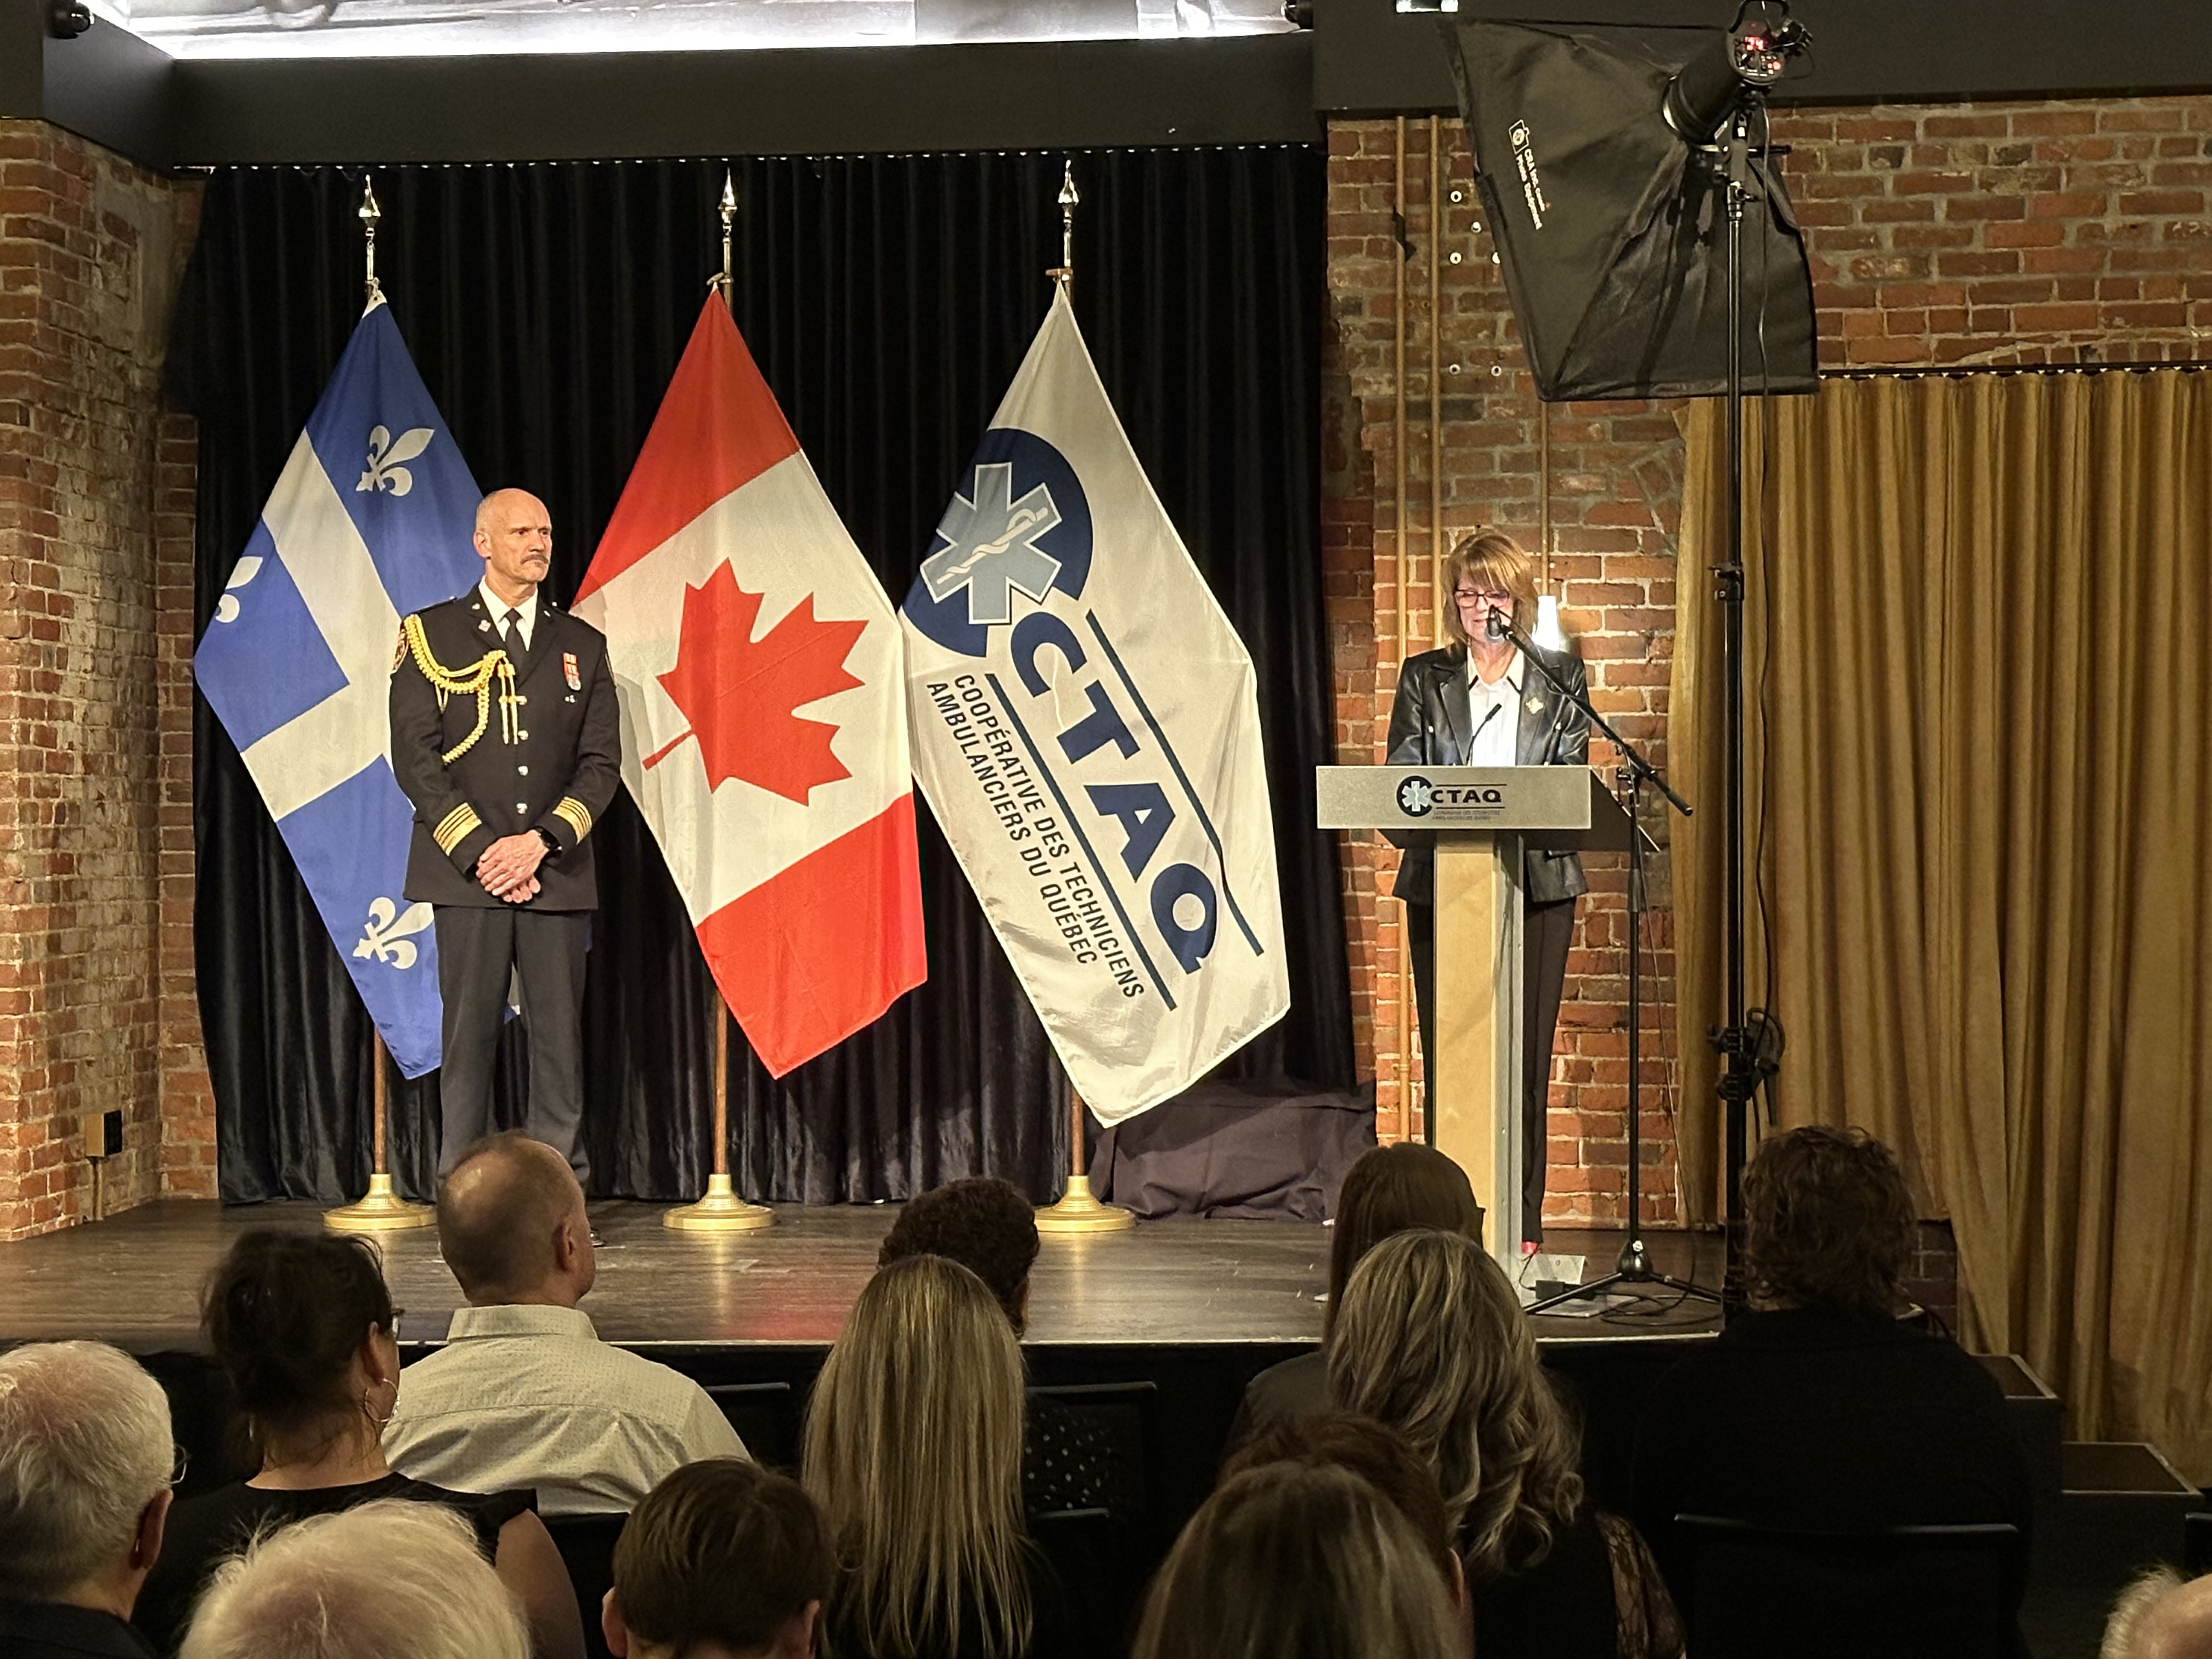 Ceremony for the presentation of the Medal for Distinguished Service to members of the Coopérative des techniciens ambulanciers du Québec